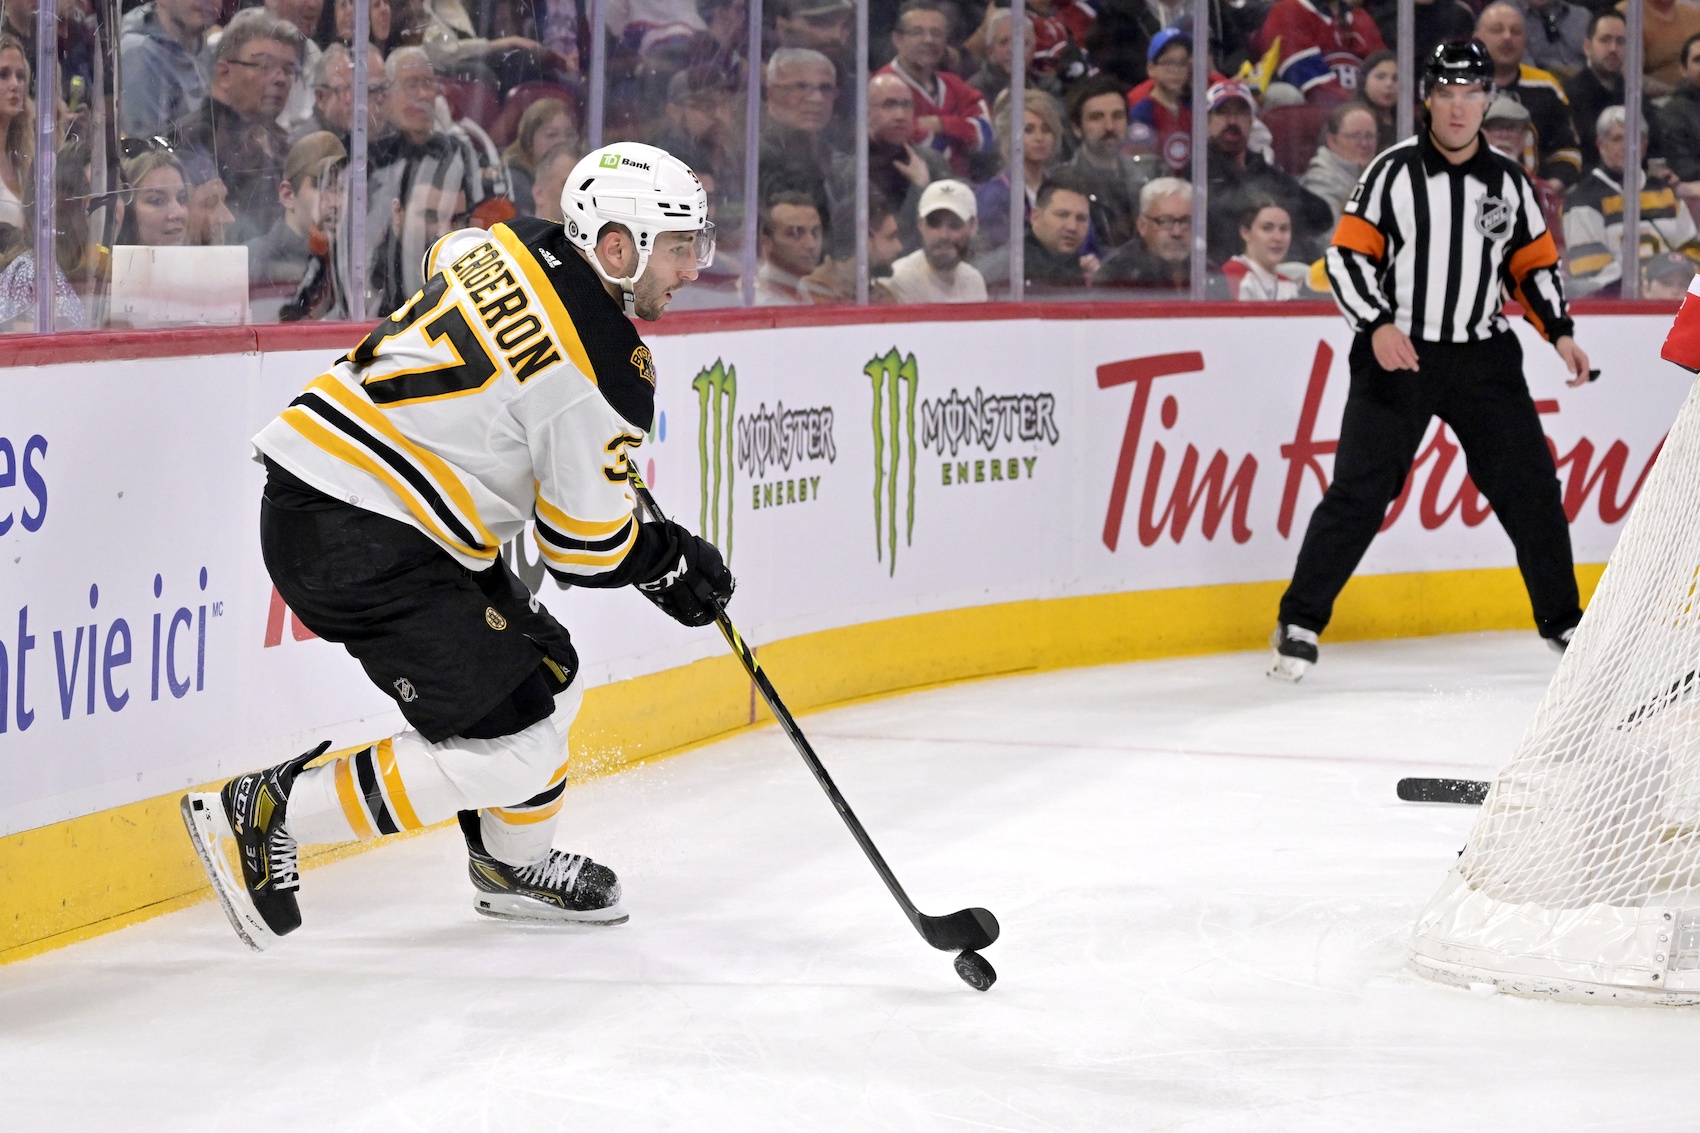 Apr 13, 2023; Montreal, Quebec, CAN; Boston Bruins forward Patrice Bergeron (37) plays the puck behind the Montreal Canadiens net during the first period at the Bell Centre. Mandatory Credit: Eric Bolte-USA TODAY Sports